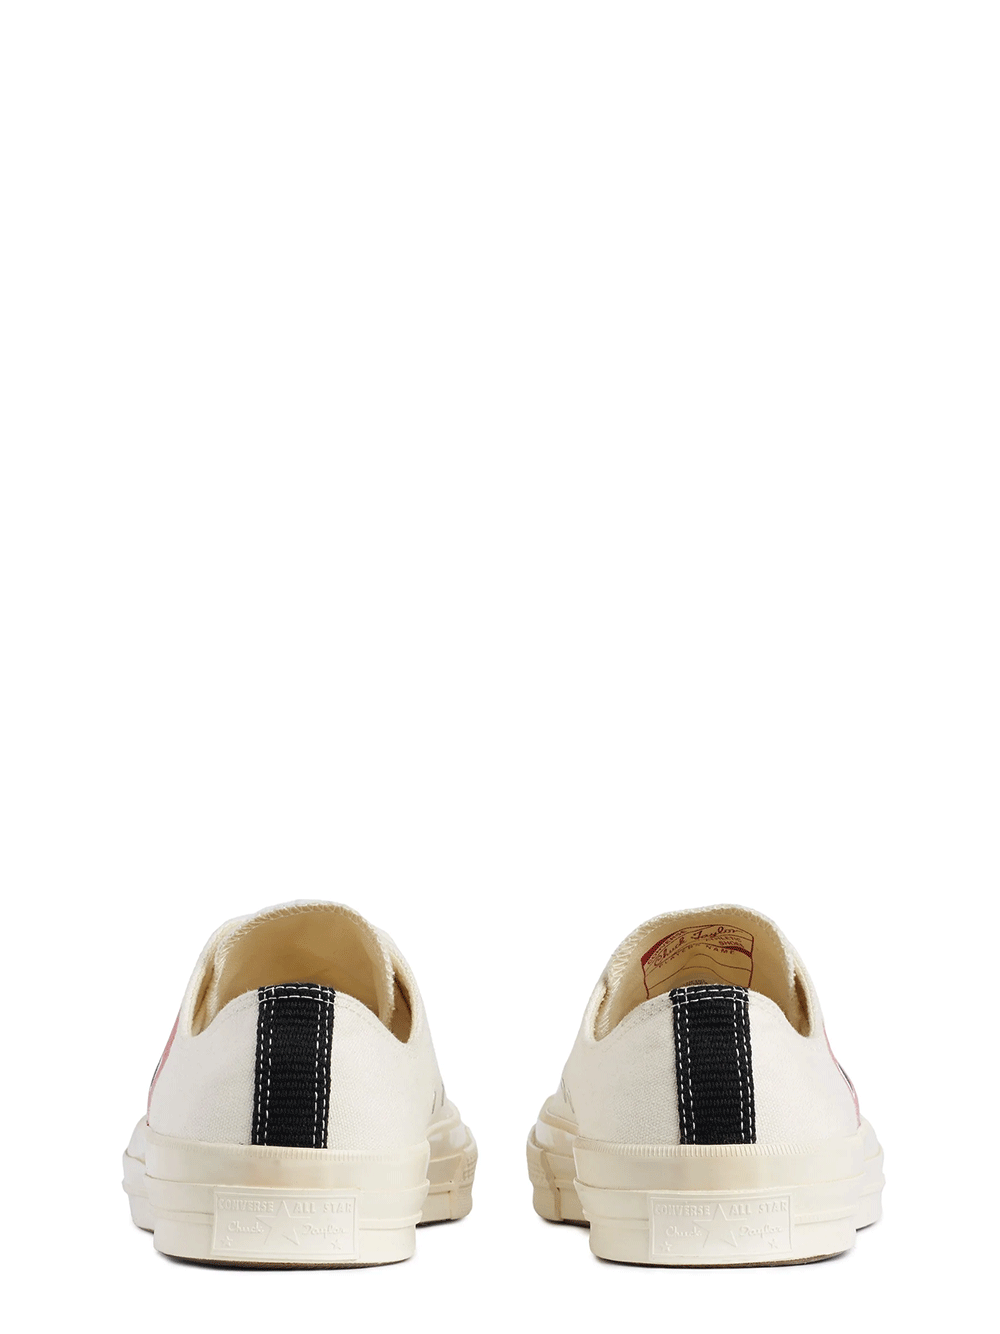 COMME-des-GARCONS-PLAY-CONVERSE-Converse-Peek-A-Boo-Heart-Low-Cut-Sneakers-White-3